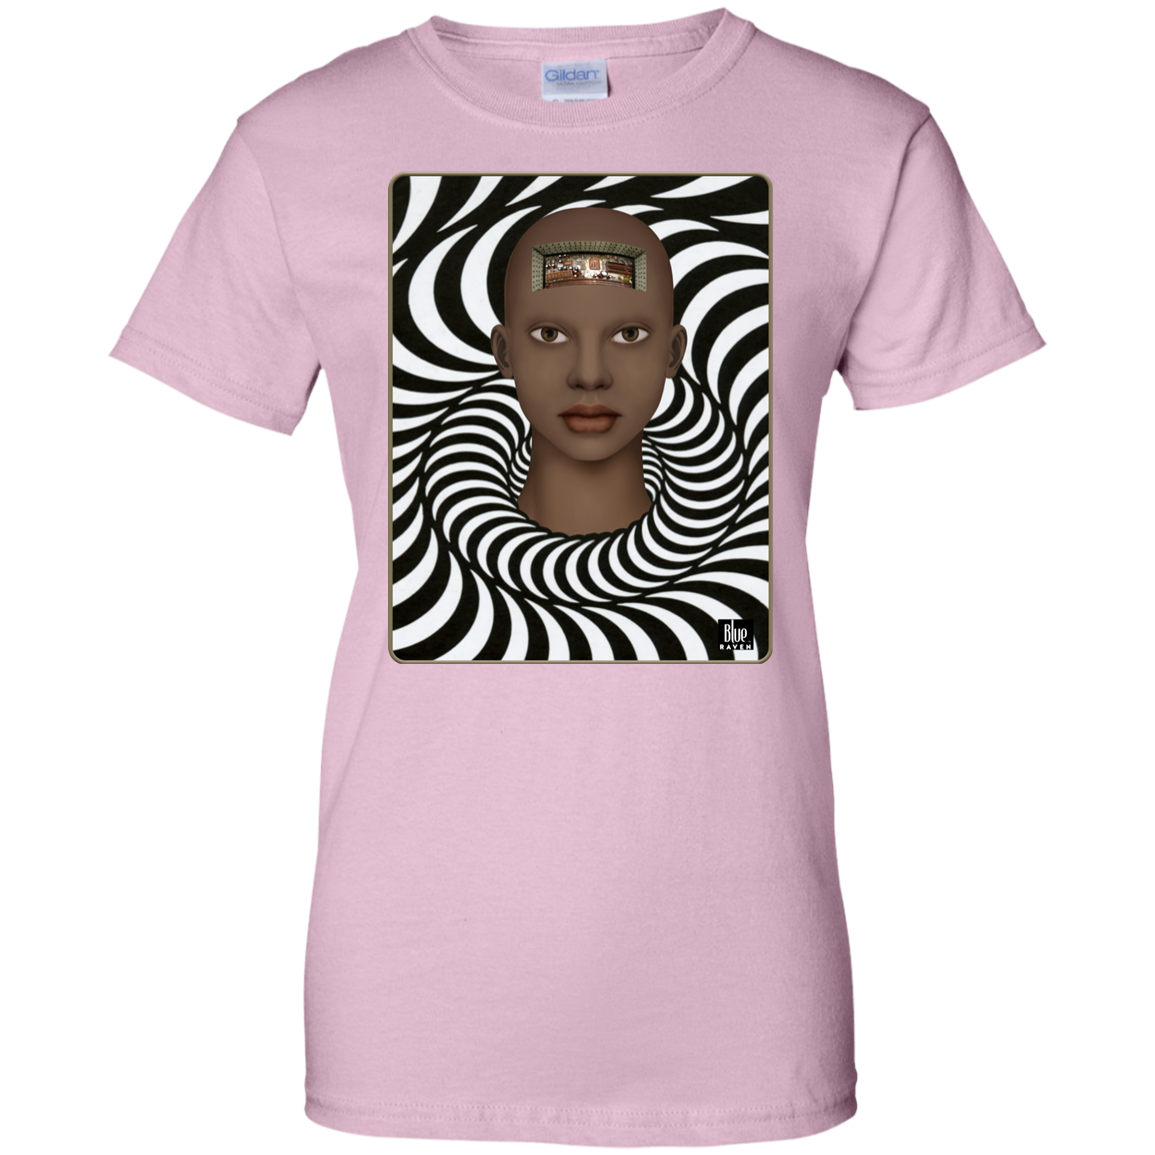 COMPUTERIZED IV - Women's Relaxed Fit T-Shirt